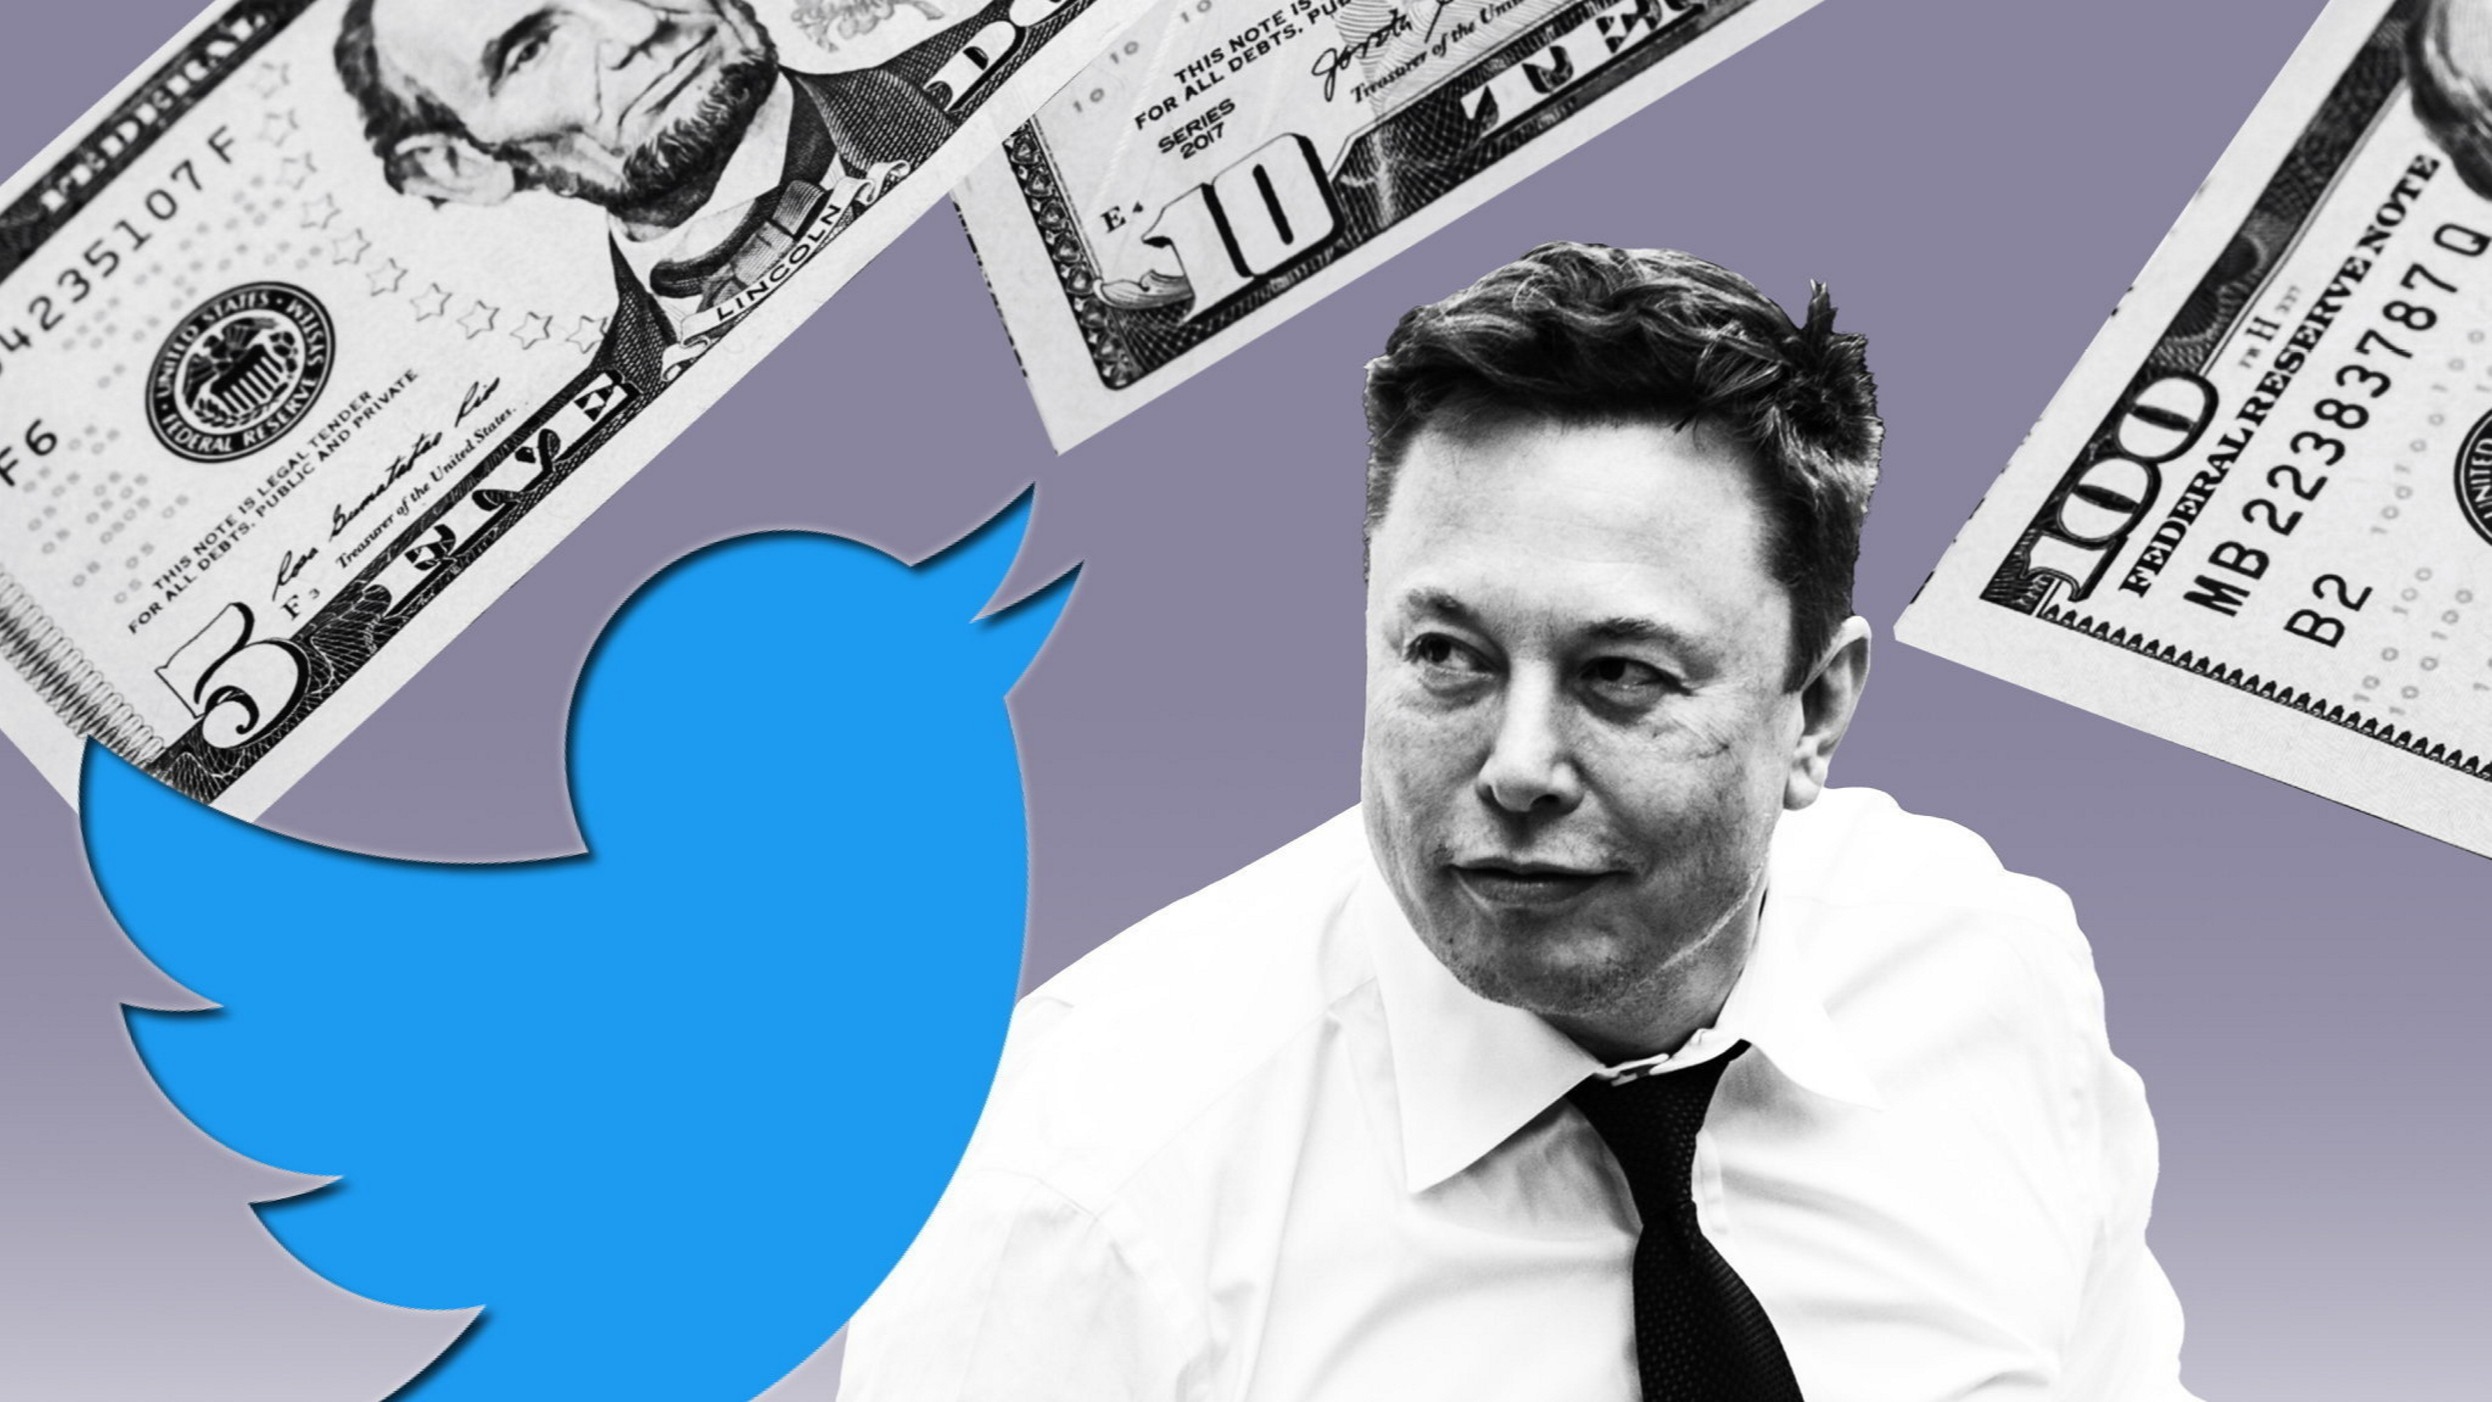 Twitter’s Financial Performance According to Elon Musk